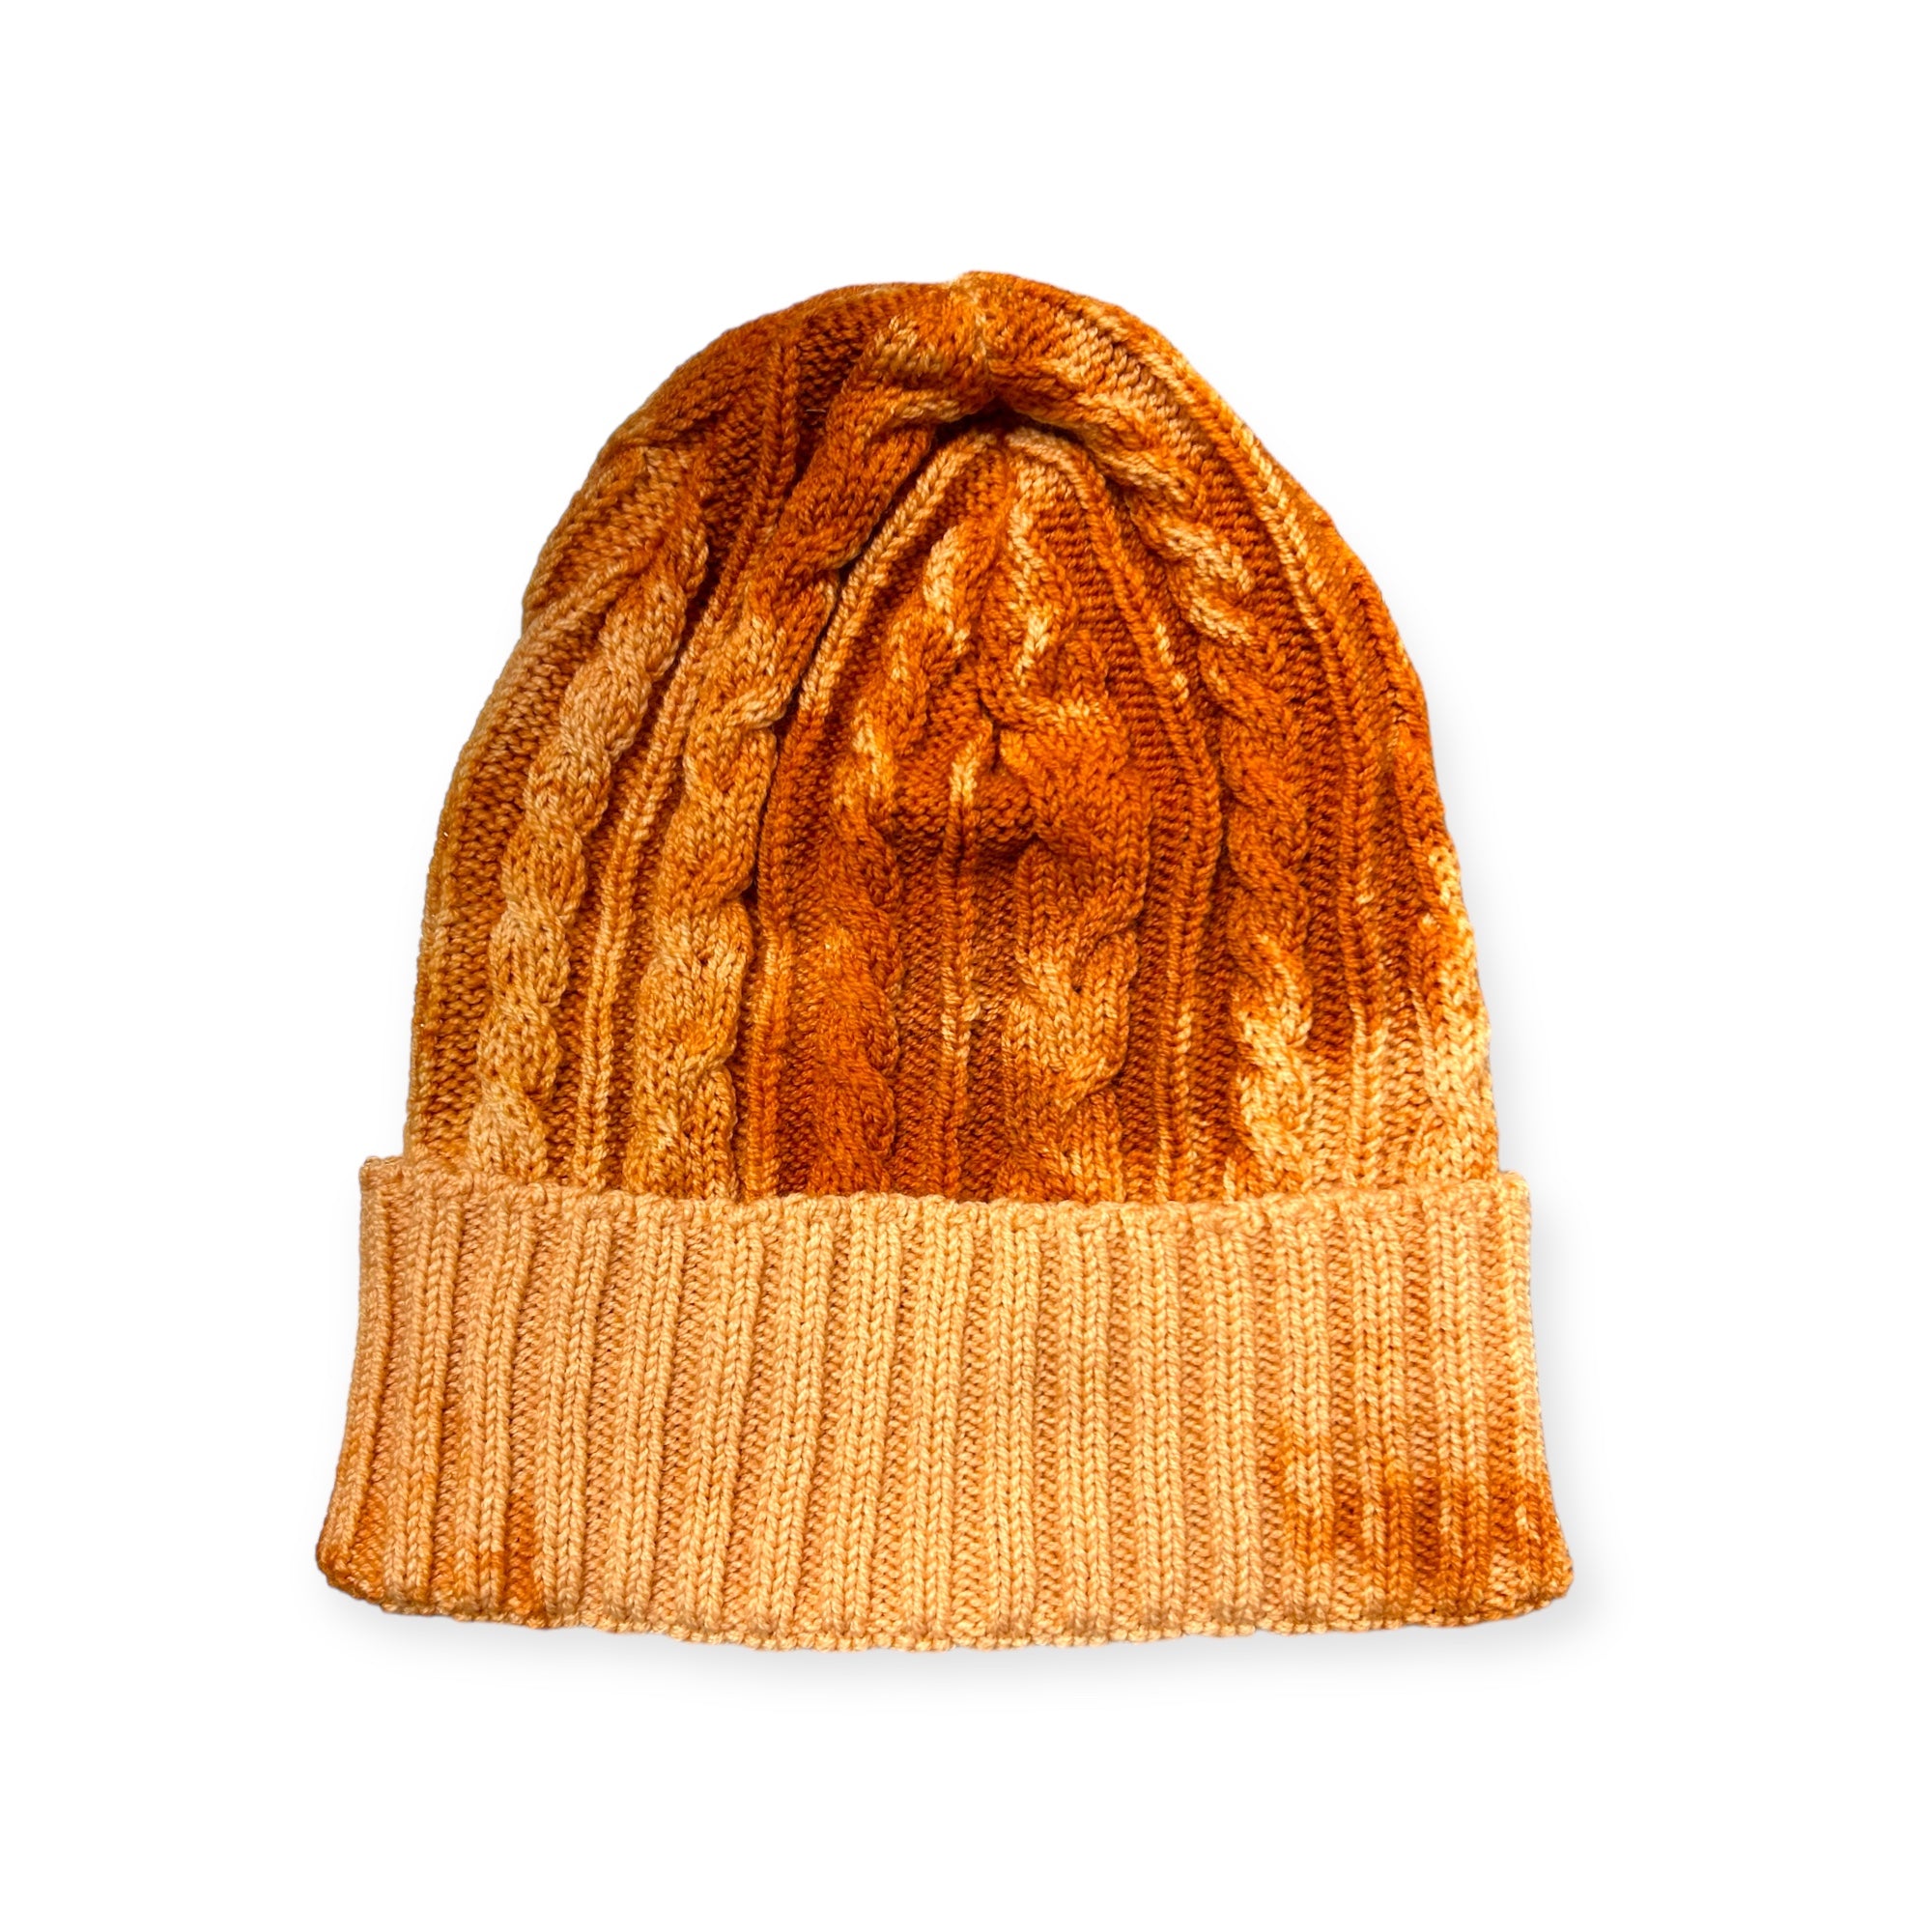 Hats-Naturally Dyed Beanie - Onion Skin Marbled-WOOLTRIBE